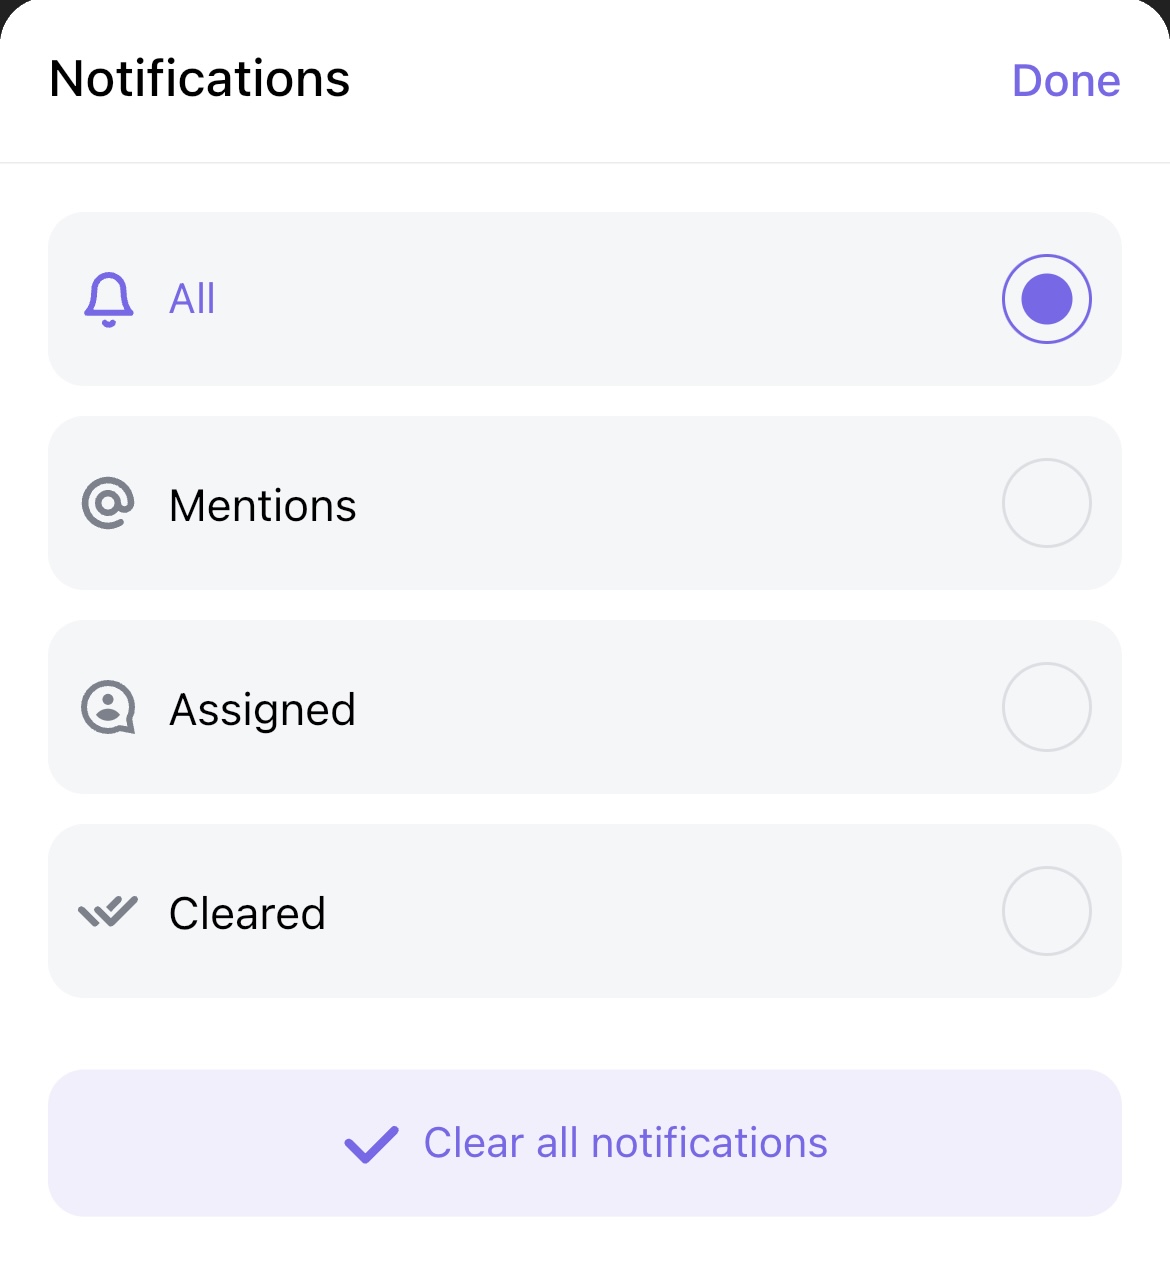 Screenshot of the notifications filtering options on mobile.